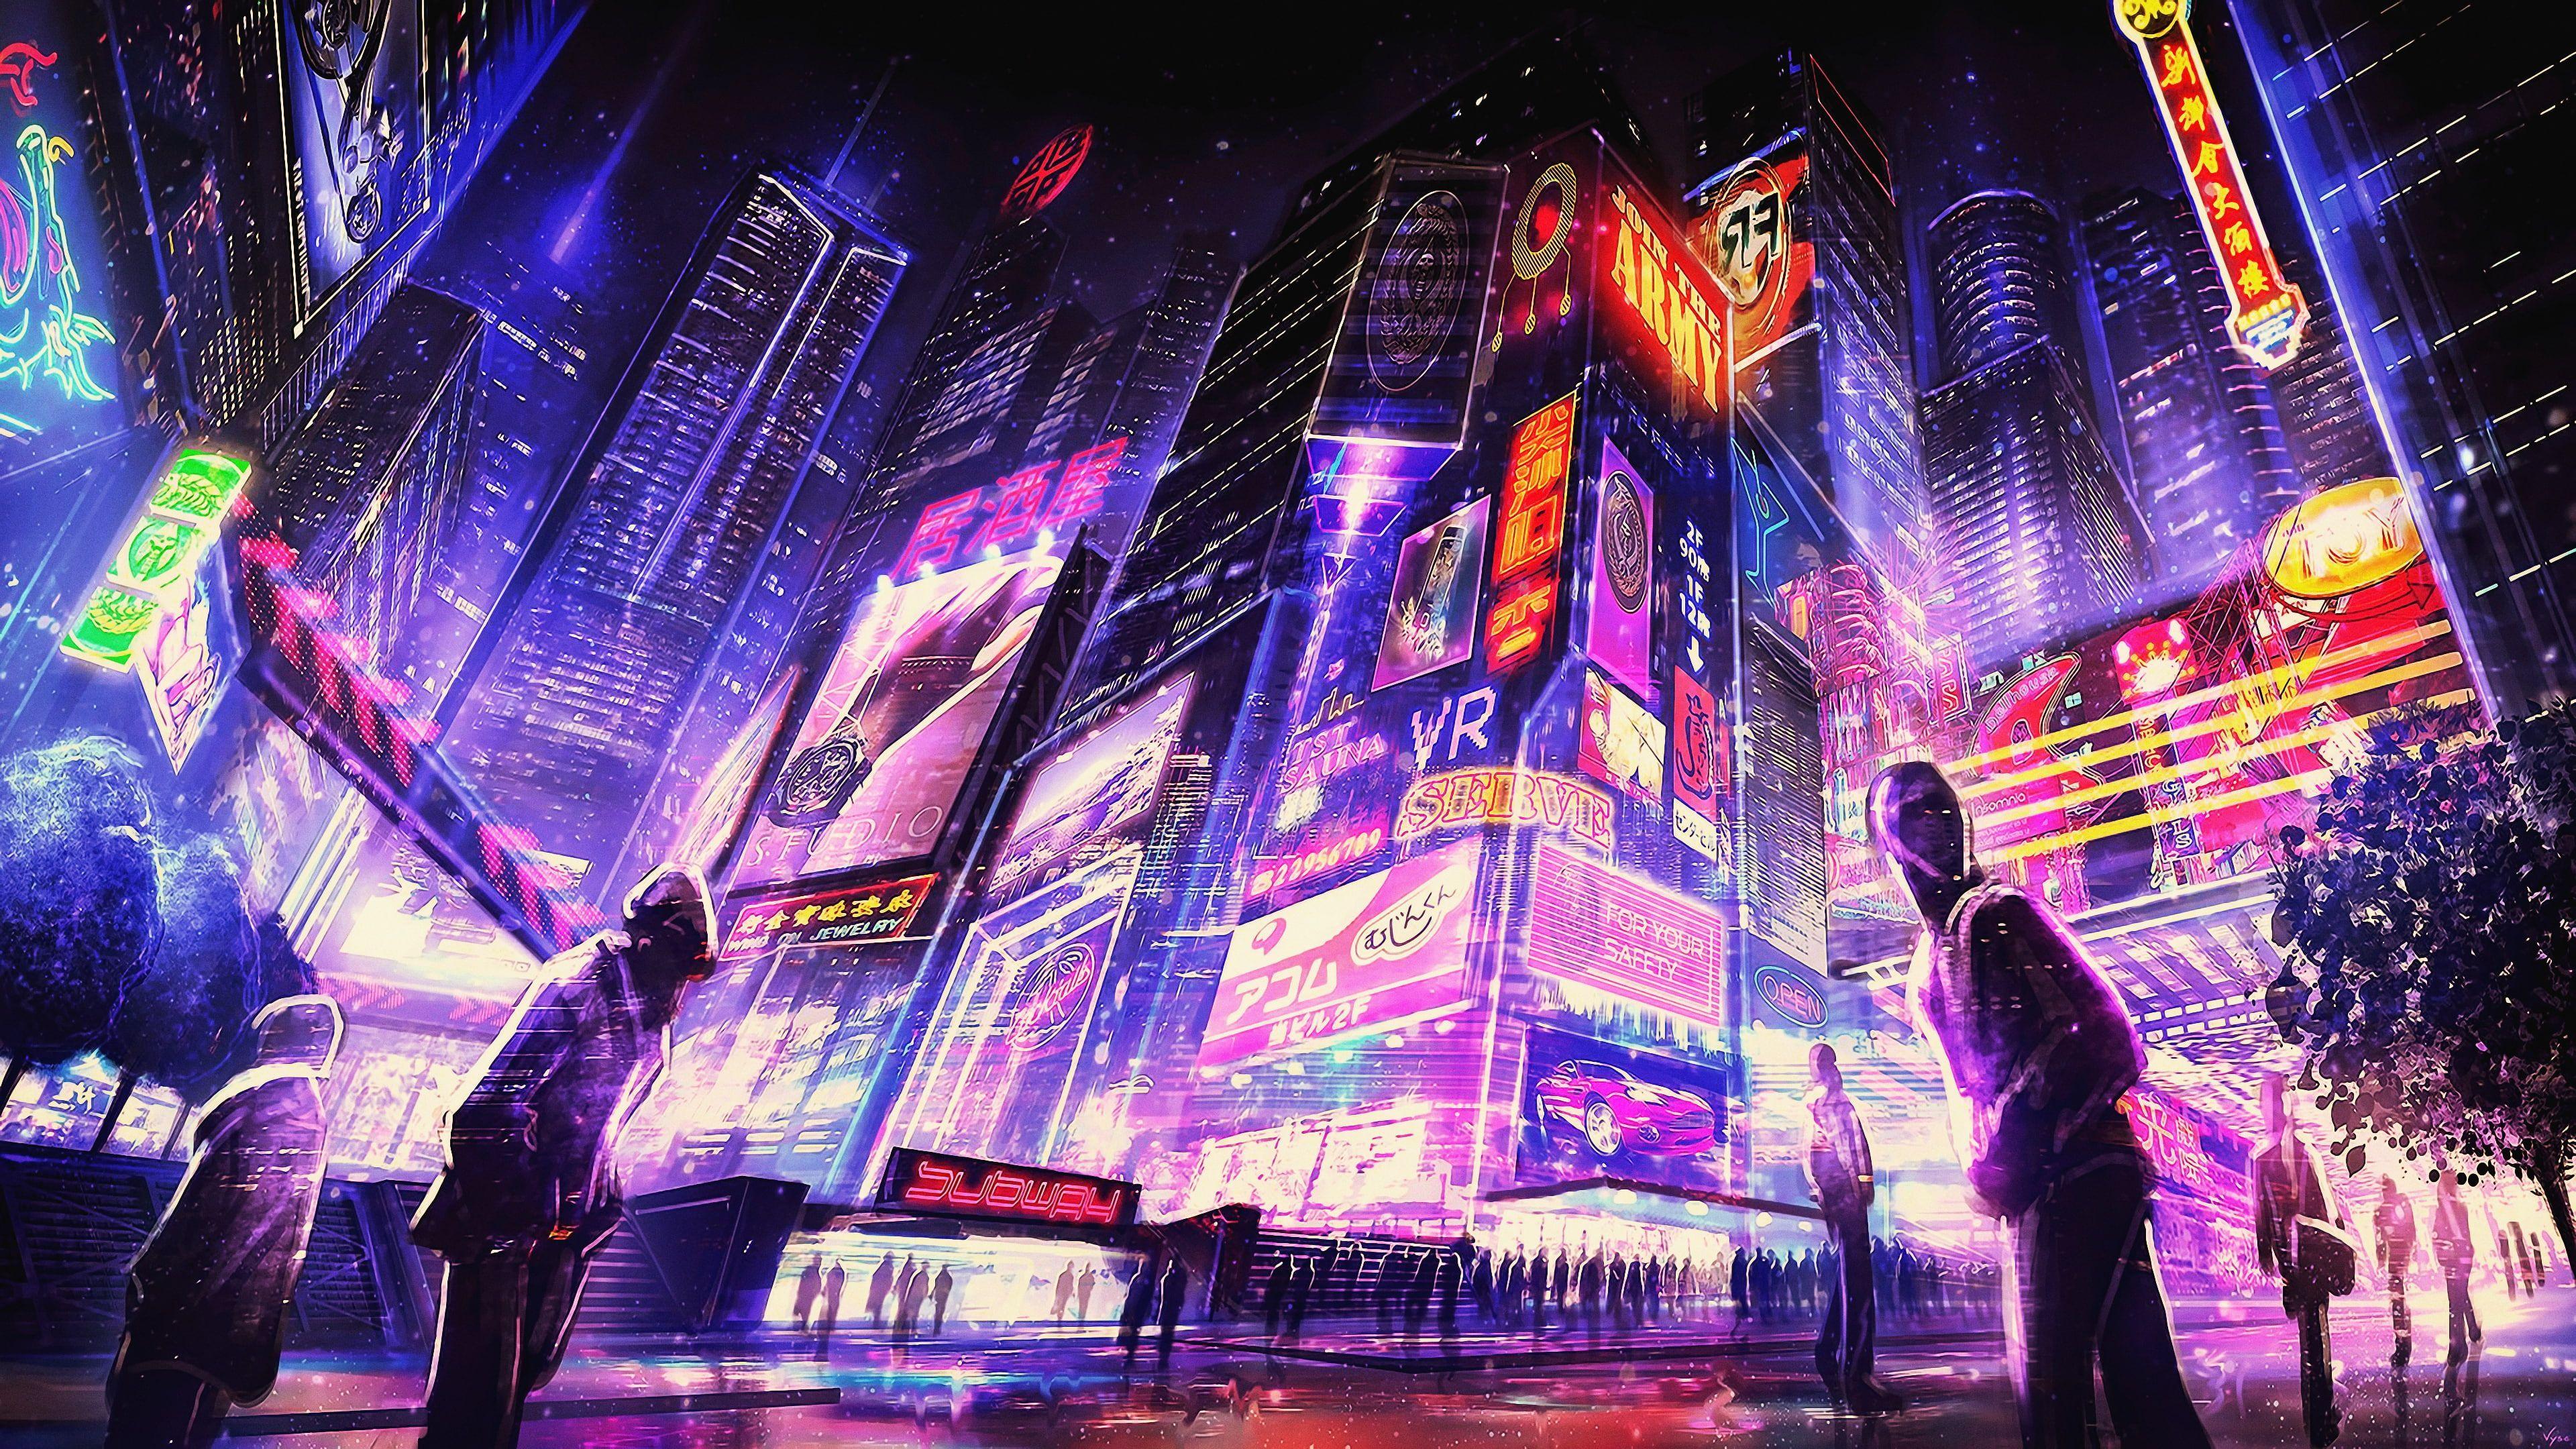 Cybercity Wallpapers Top Free Cybercity Backgrounds Wallpaperaccess 5005